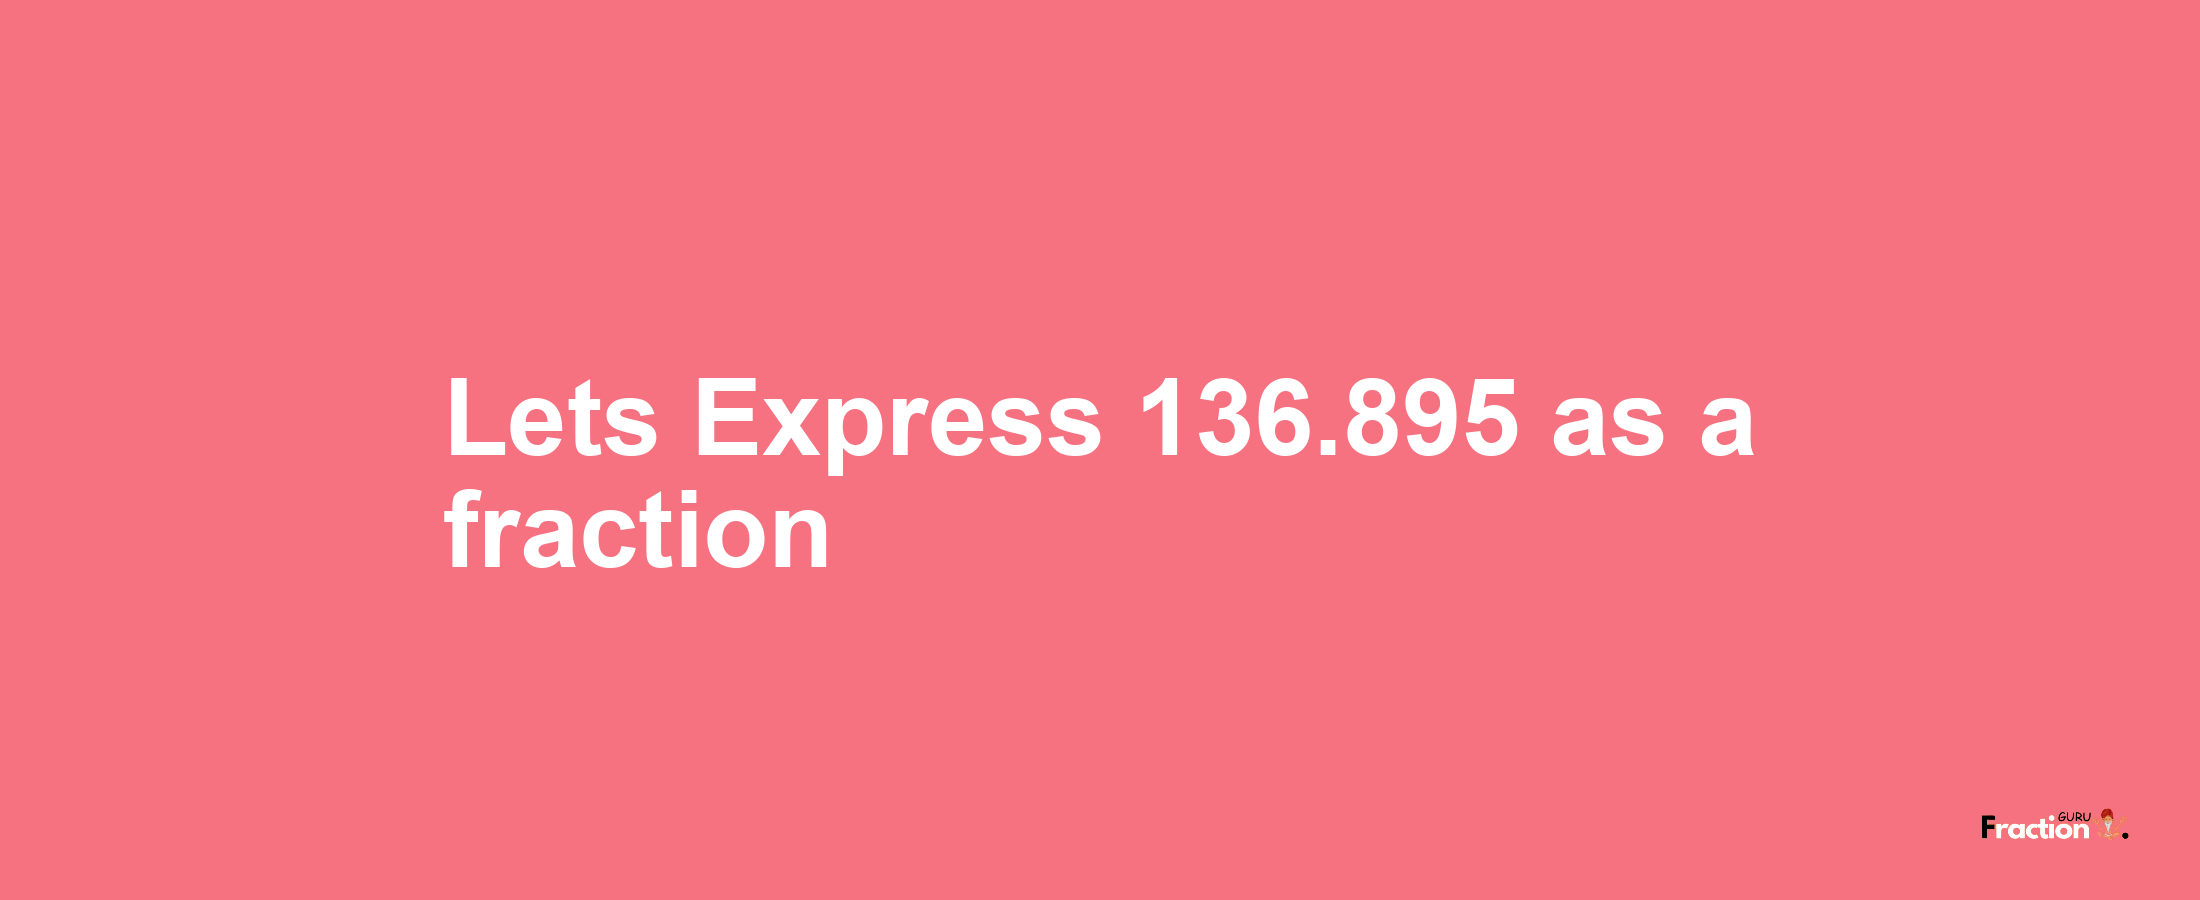 Lets Express 136.895 as afraction